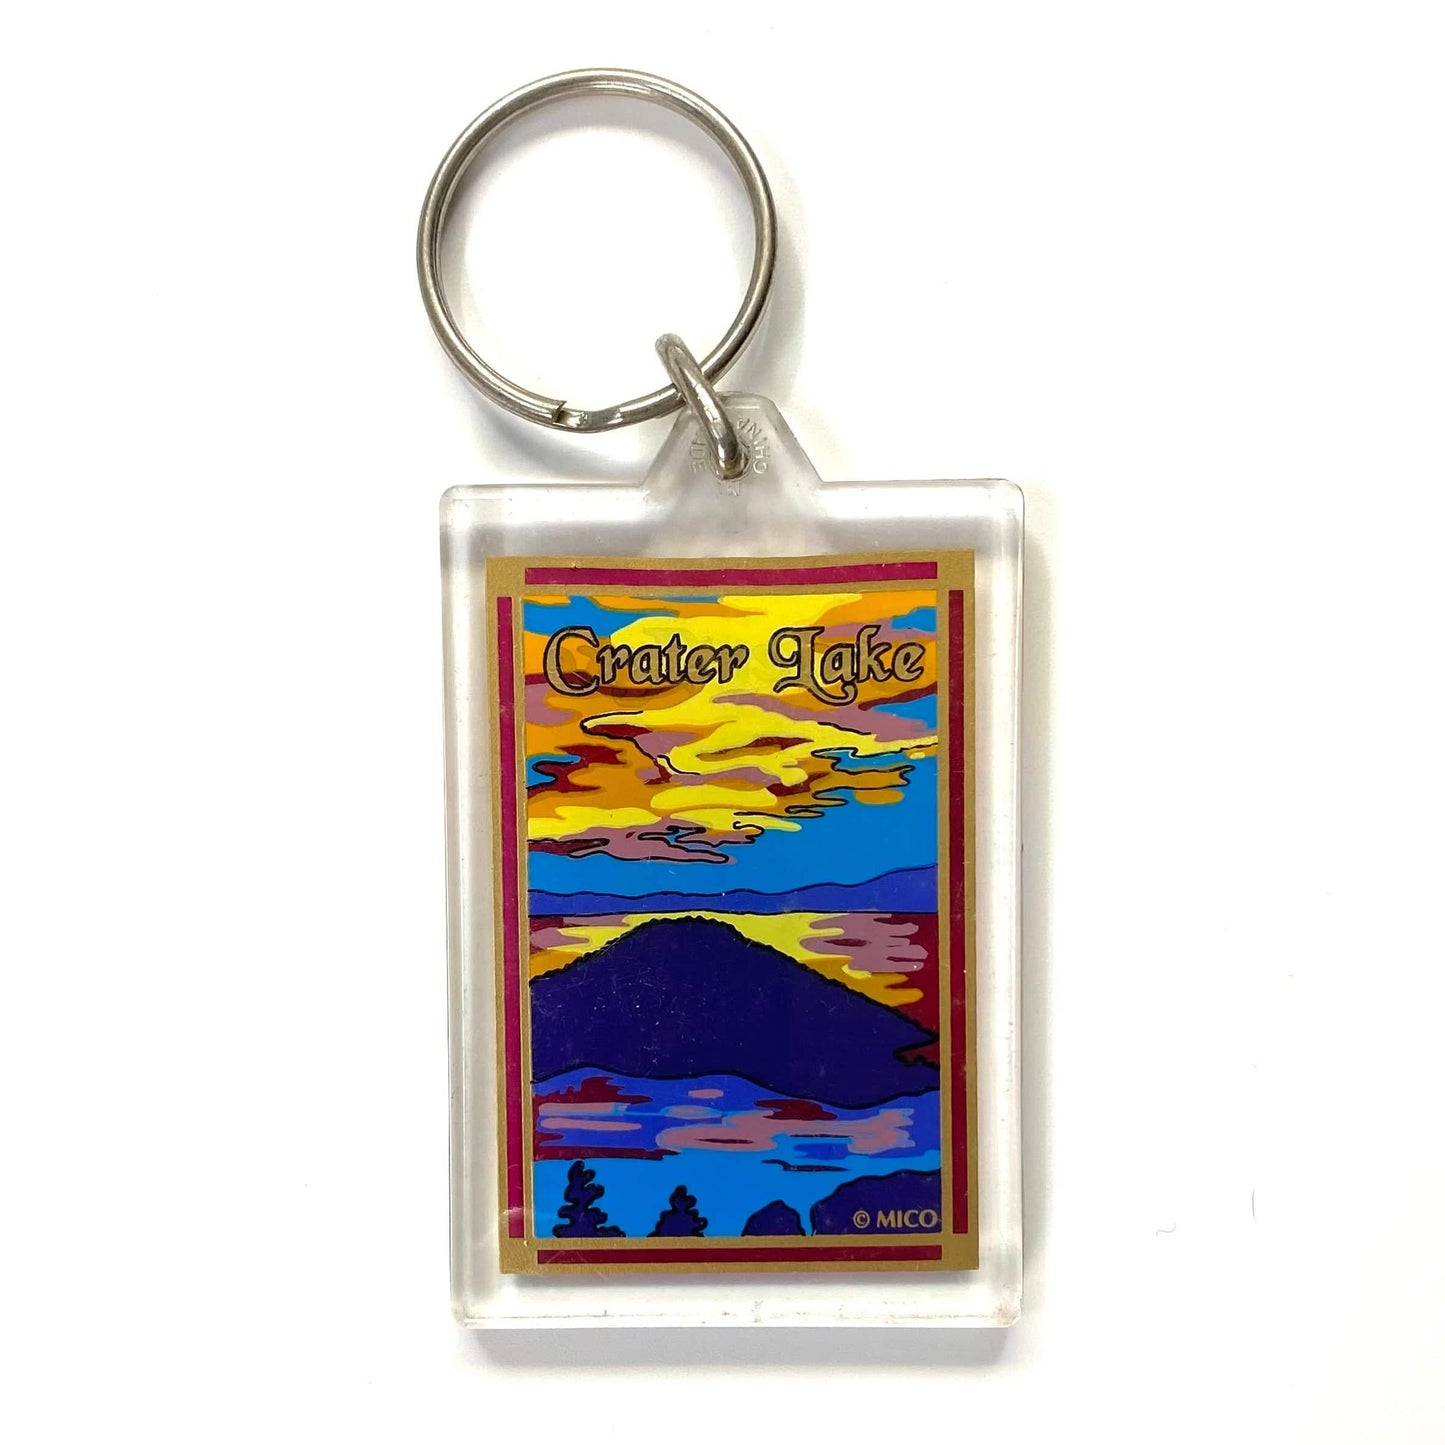 Vintage Crater Lake National Park Travel Souvenir Keychain Key Ring Rectangle Clear Acrylic